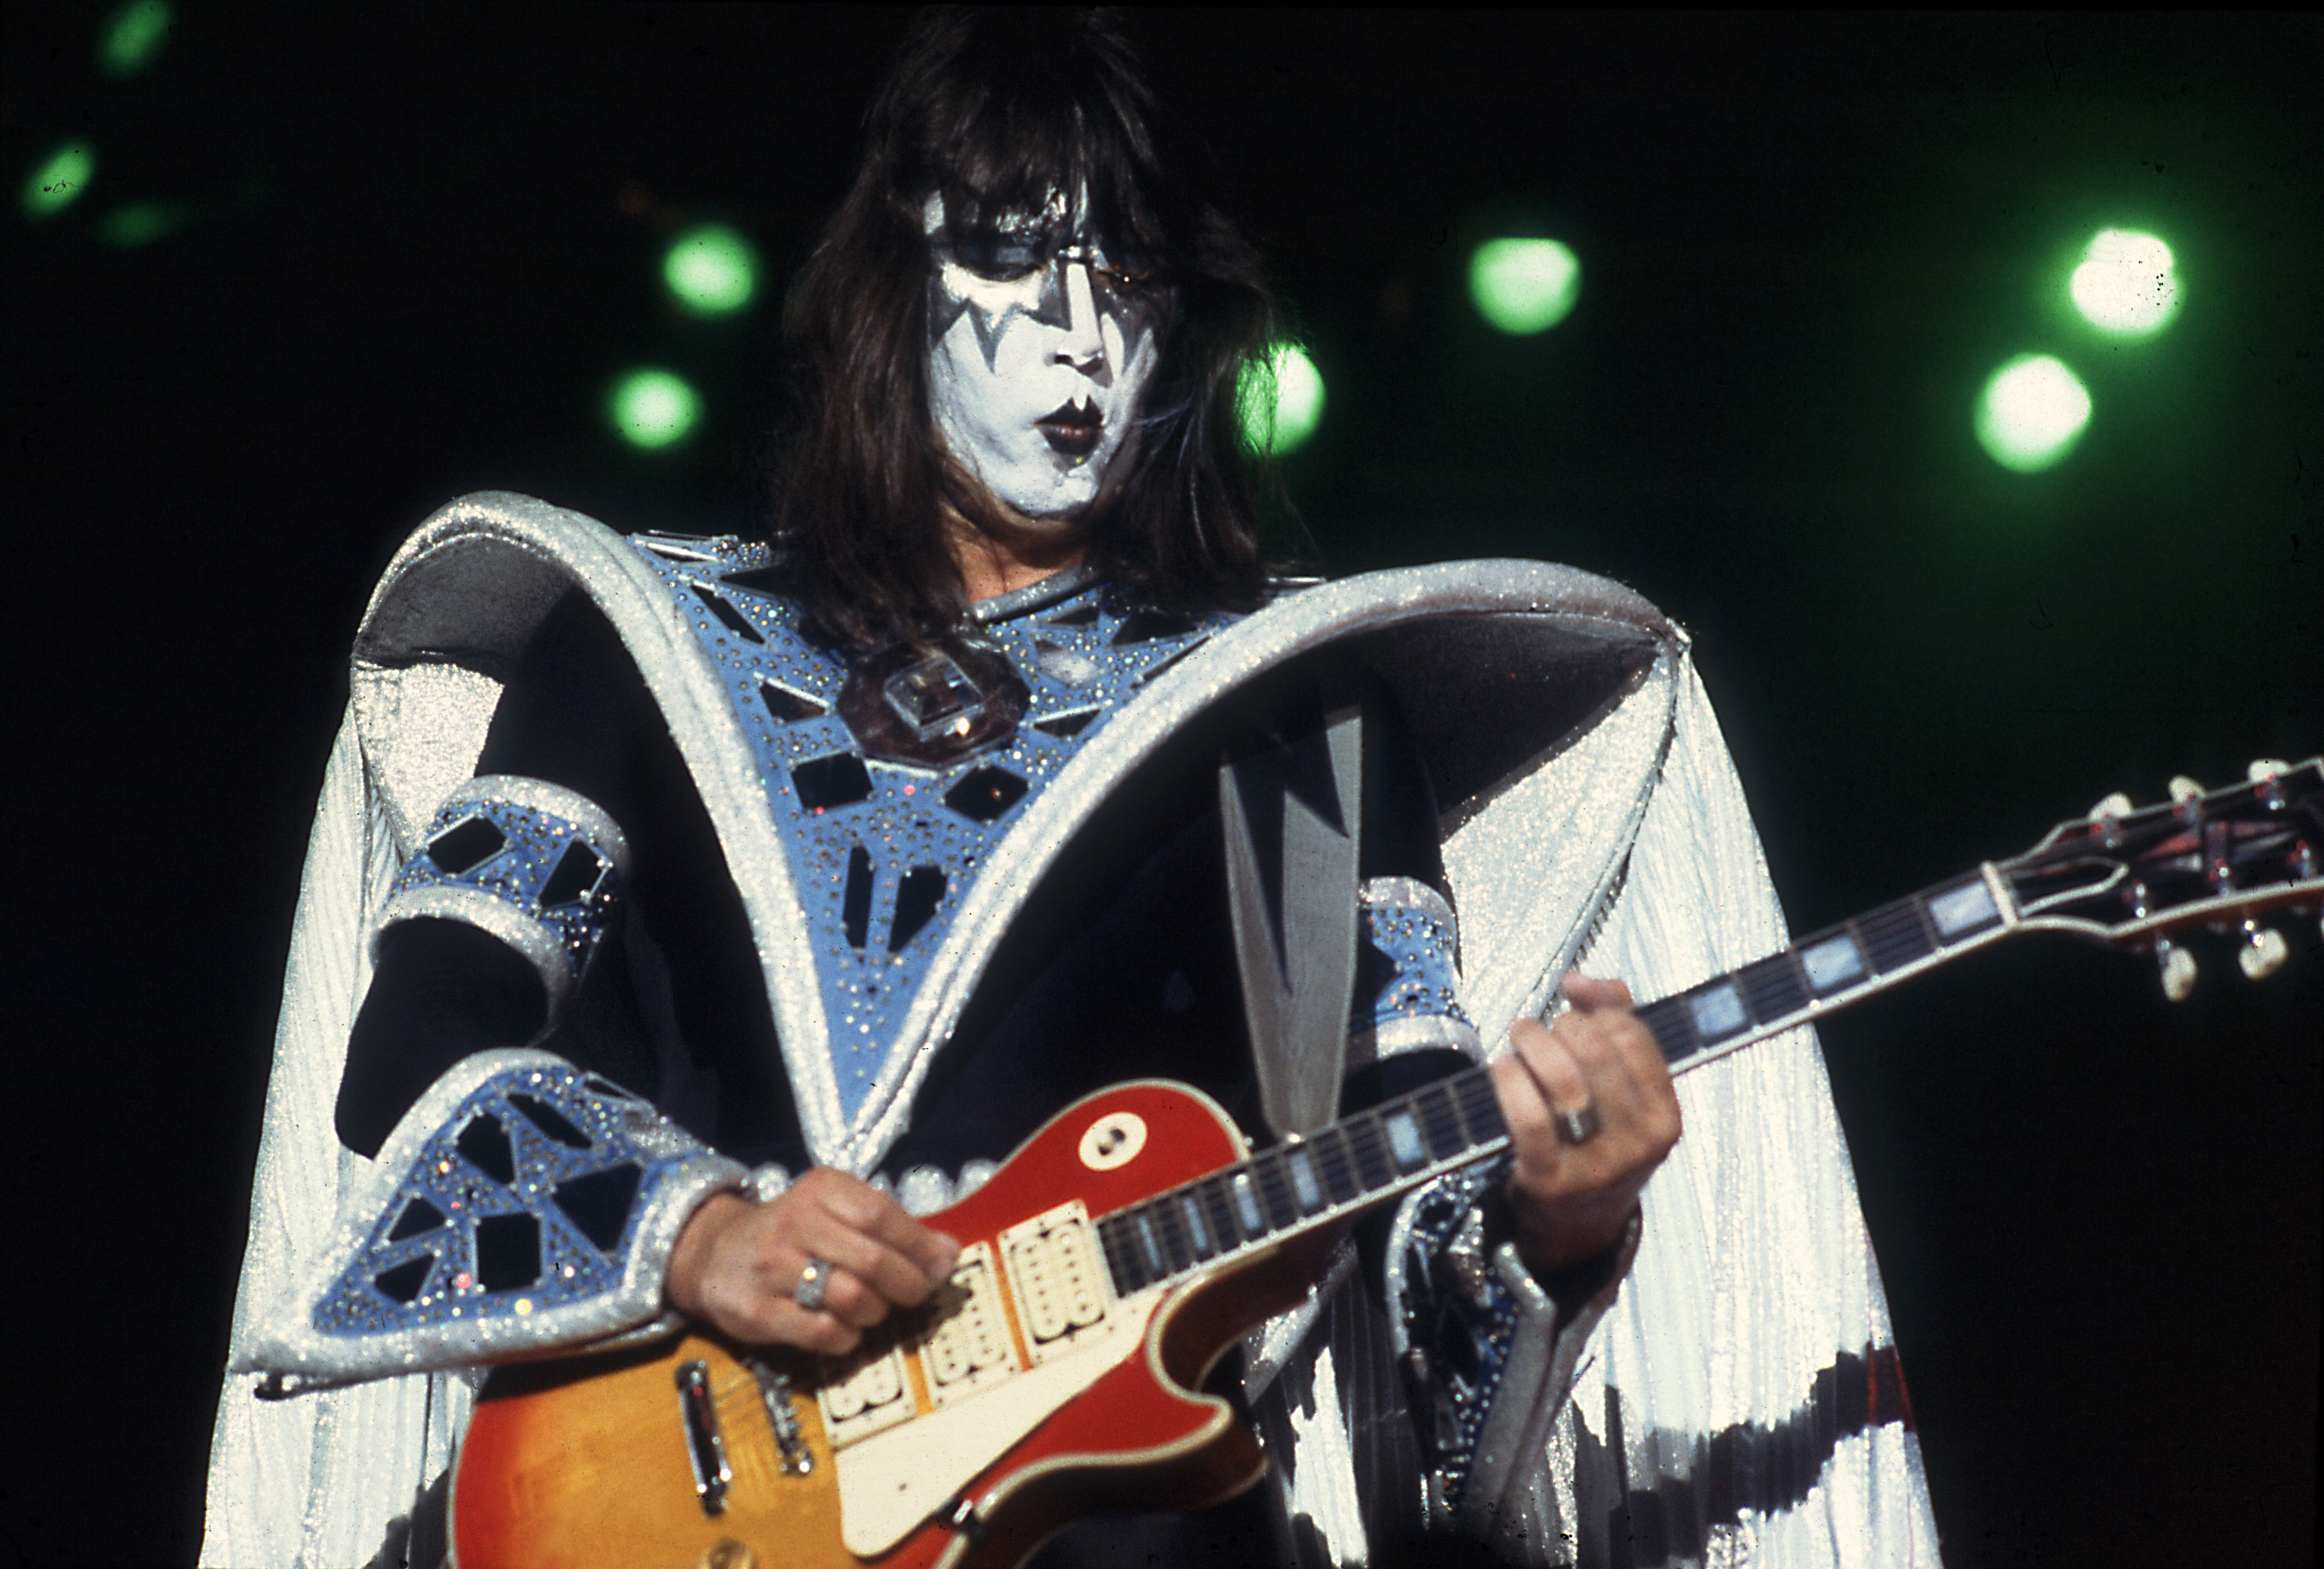 Ace Frehley of Kiss holding a guitar